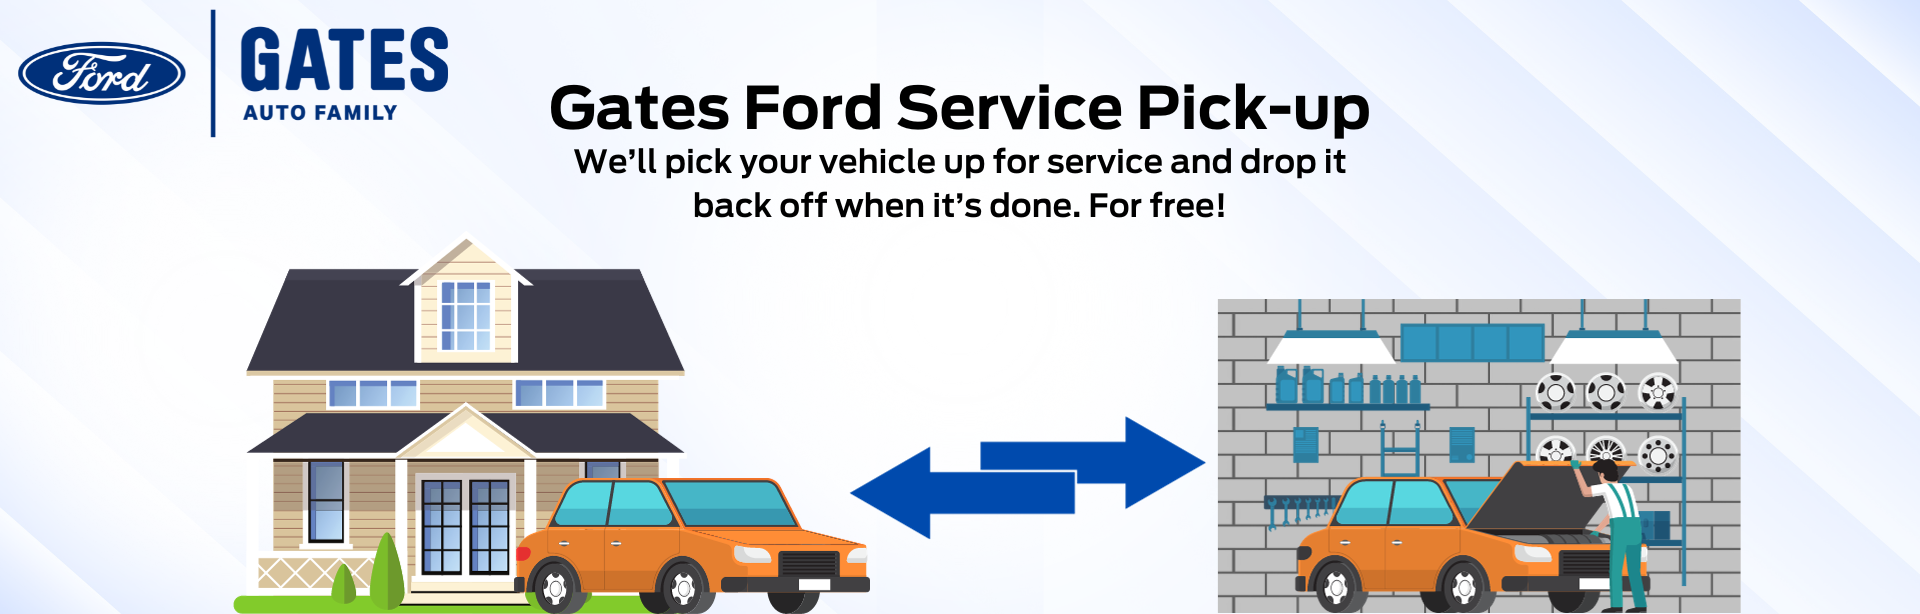 Gates Ford Service Pick-up